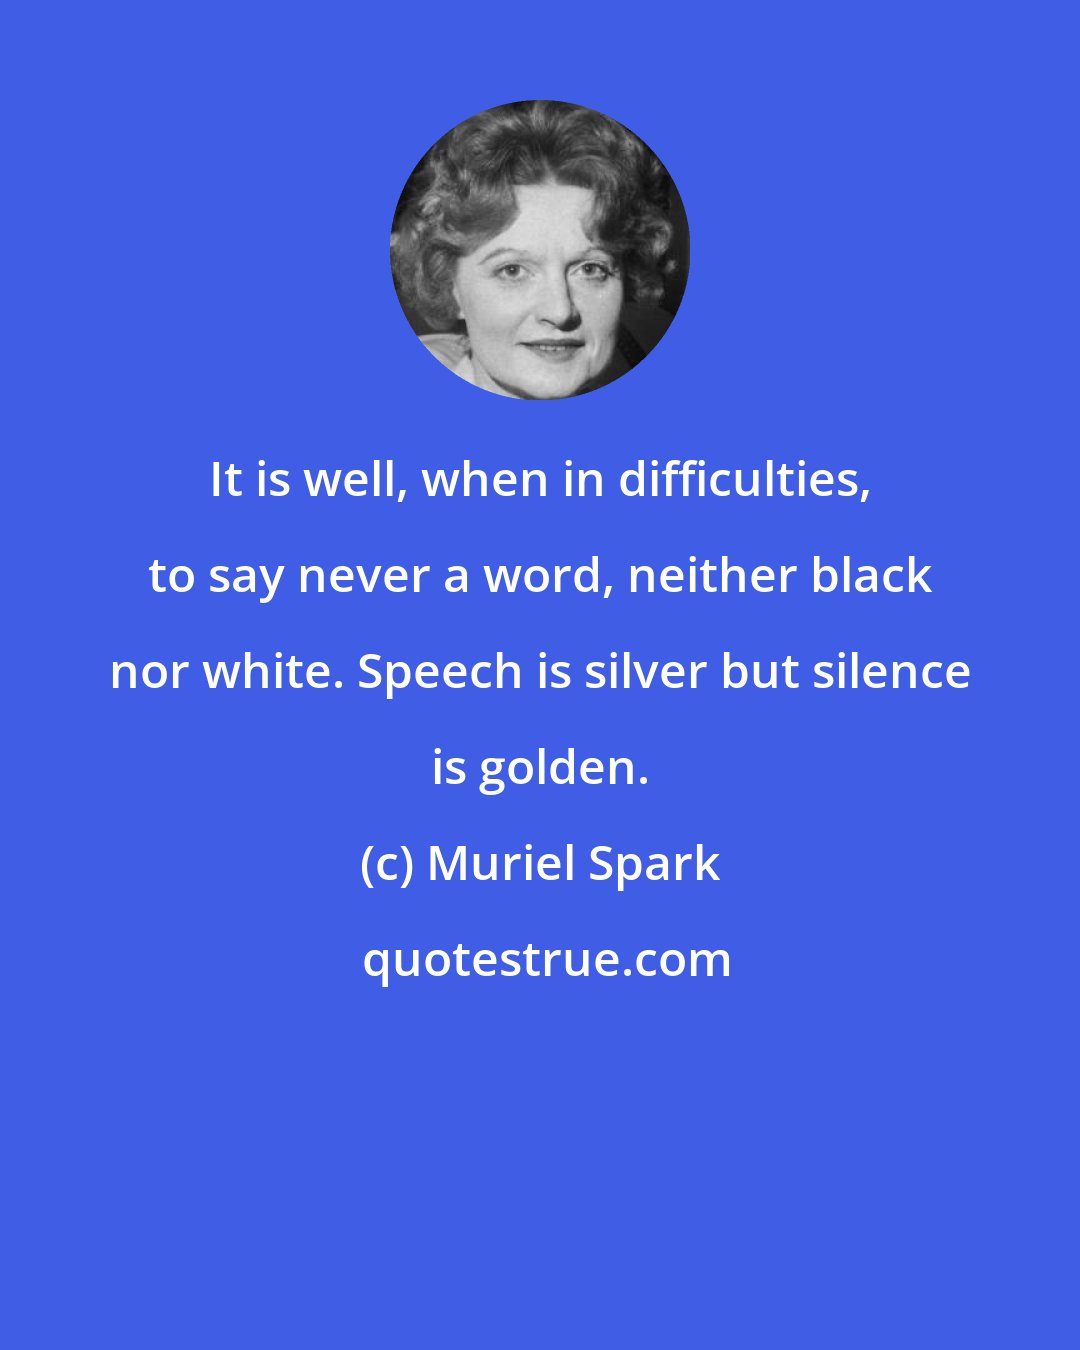 Muriel Spark: It is well, when in difficulties, to say never a word, neither black nor white. Speech is silver but silence is golden.